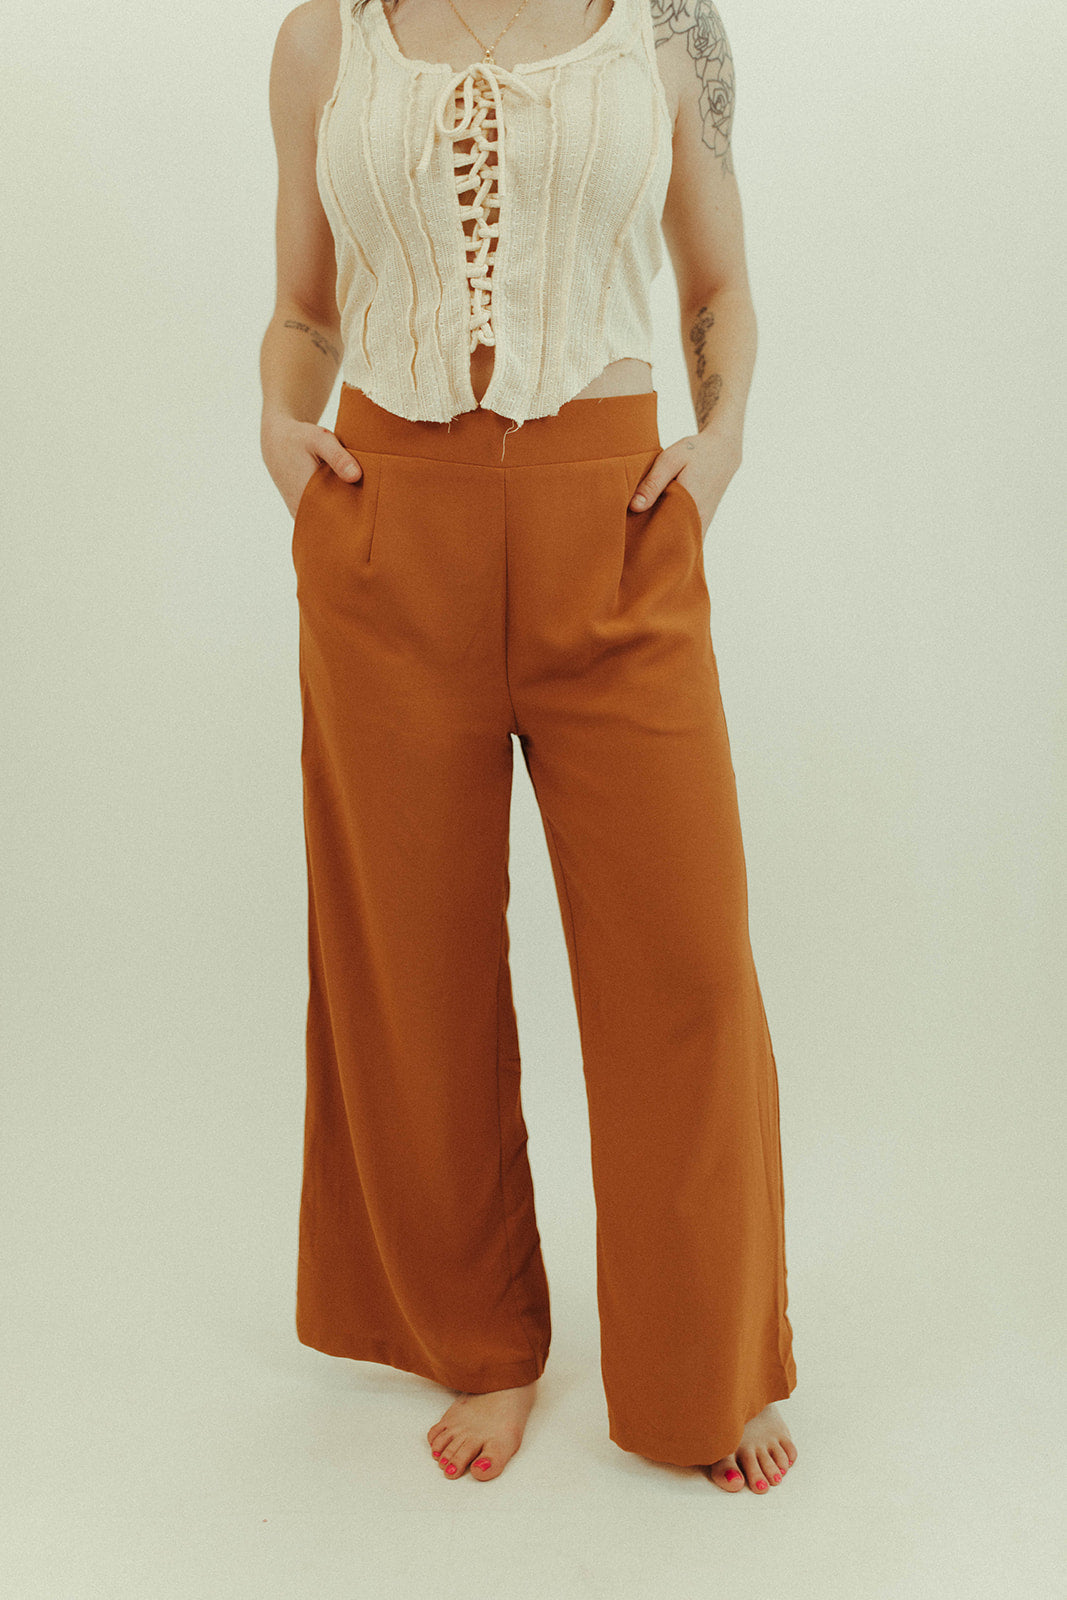 Thinking Of You Toffee Smocked Waist Pants